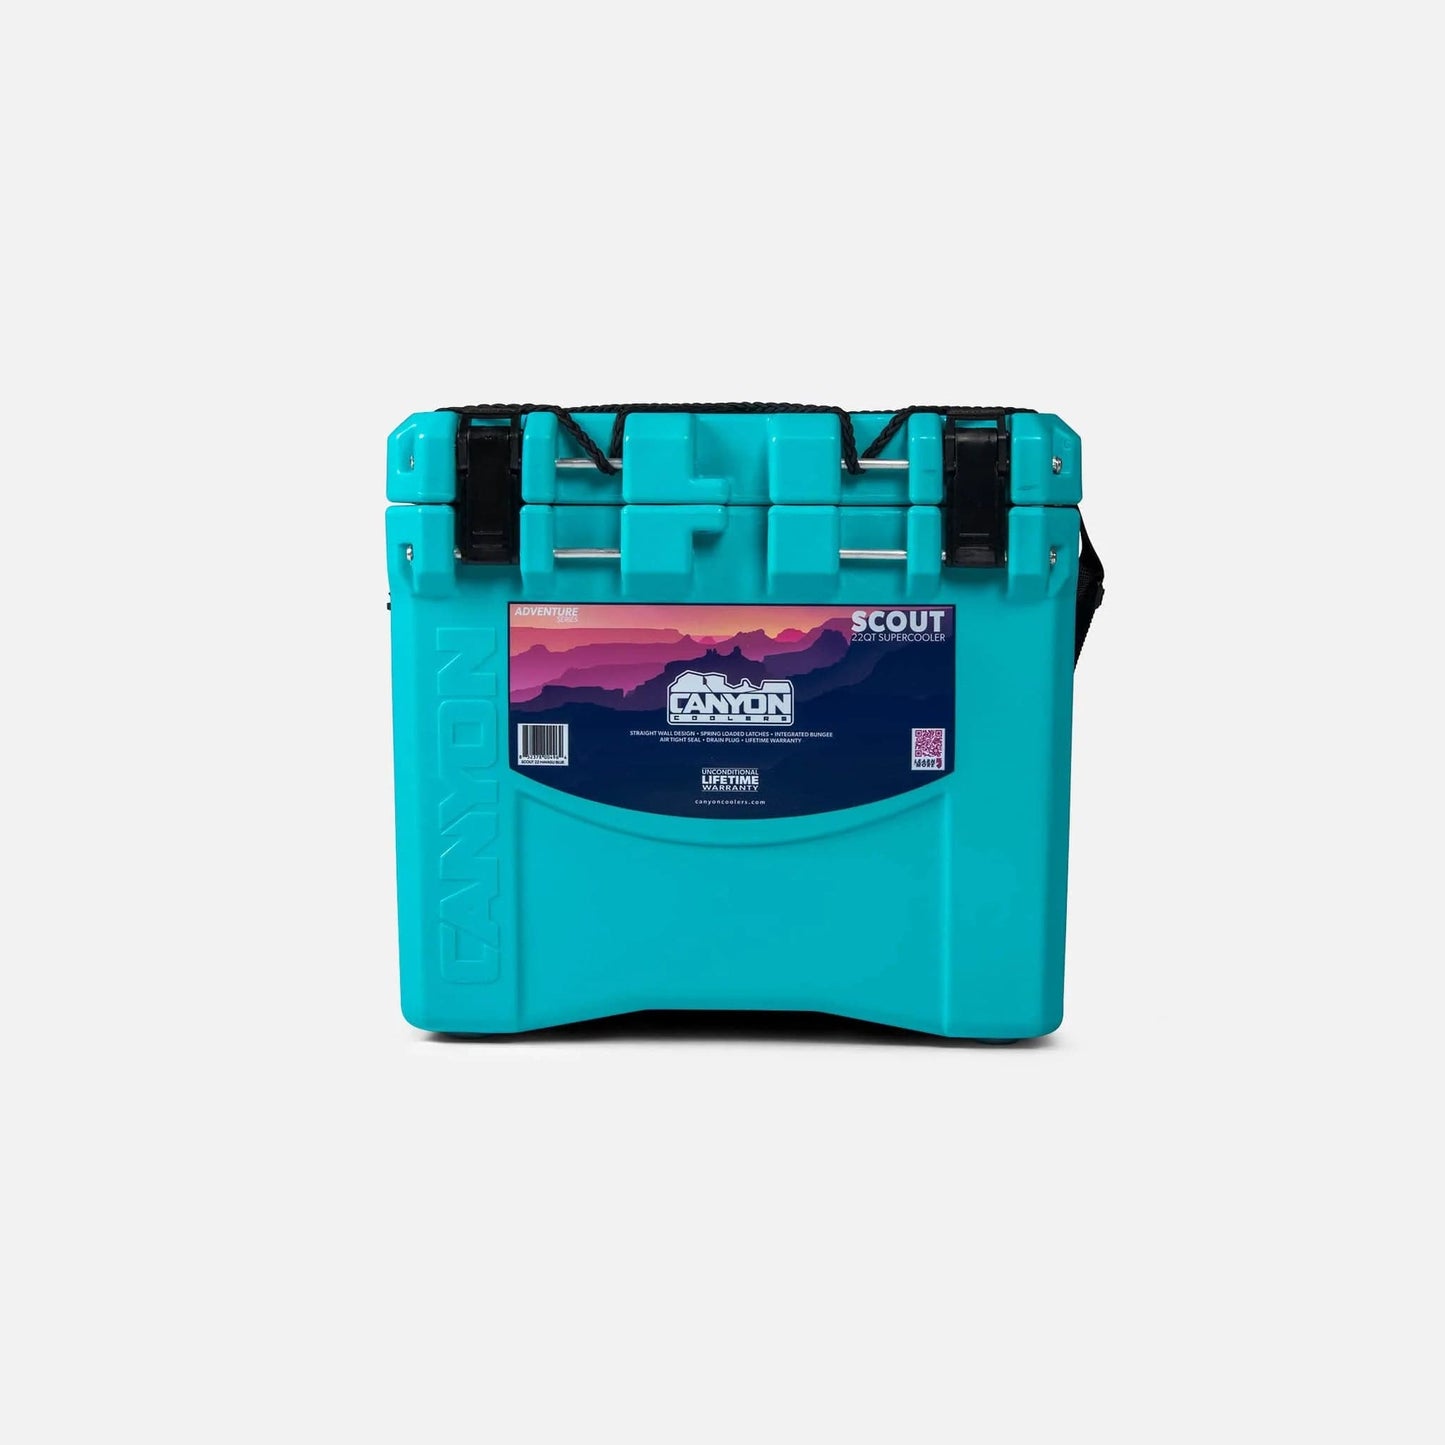 a Canyon Scout 22 Cooler with a pink and blue design.